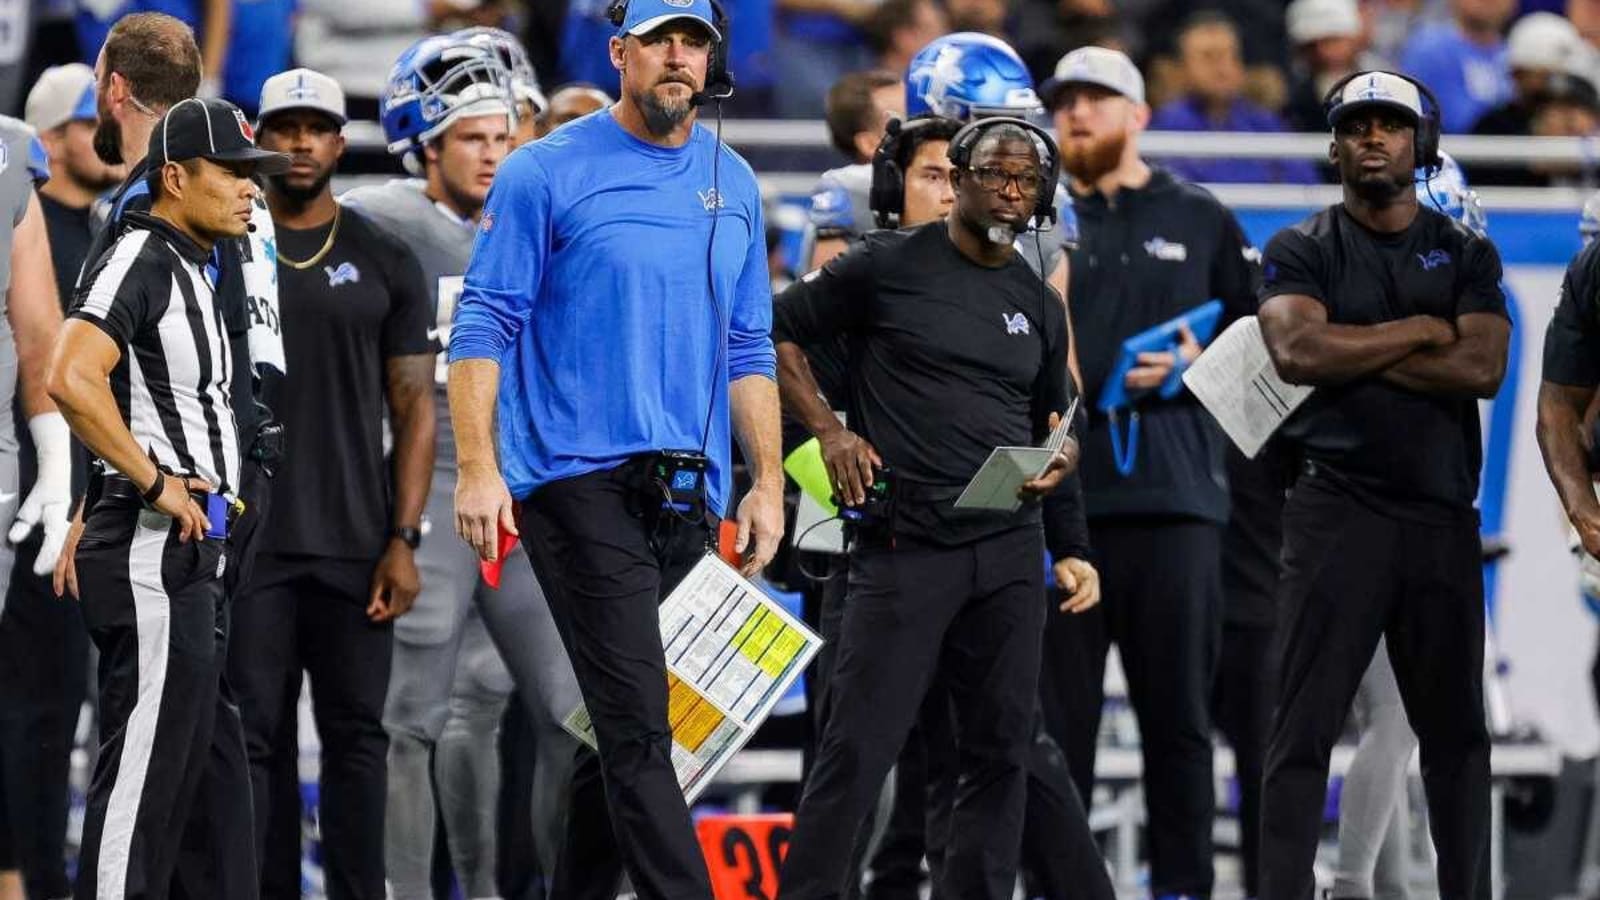 The Lions biggest problem is on track to get fixed vs Chargers